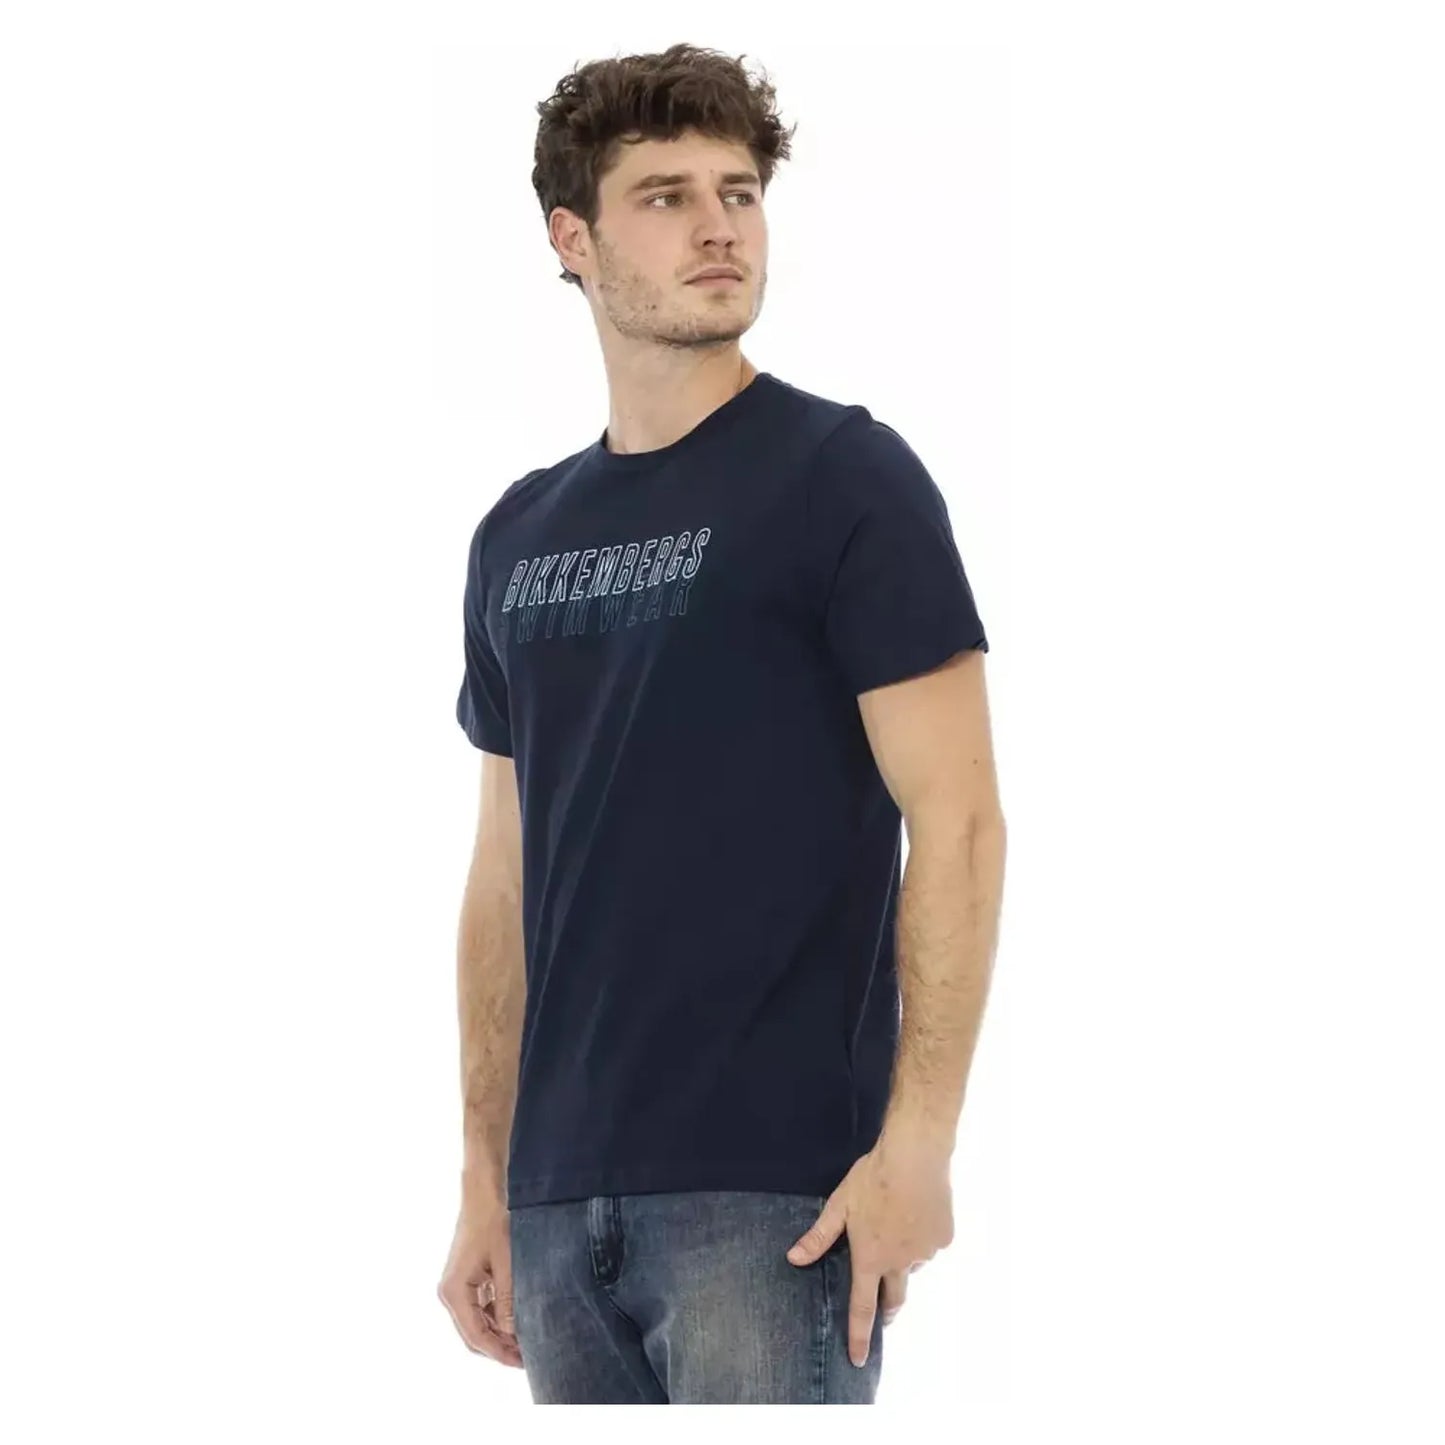 Bikkembergs Army Print Logo Tee in Pure Cotton blue-cotton-t-shirt-5 product-22050-1399607457-24-1057f161-d5c.webp